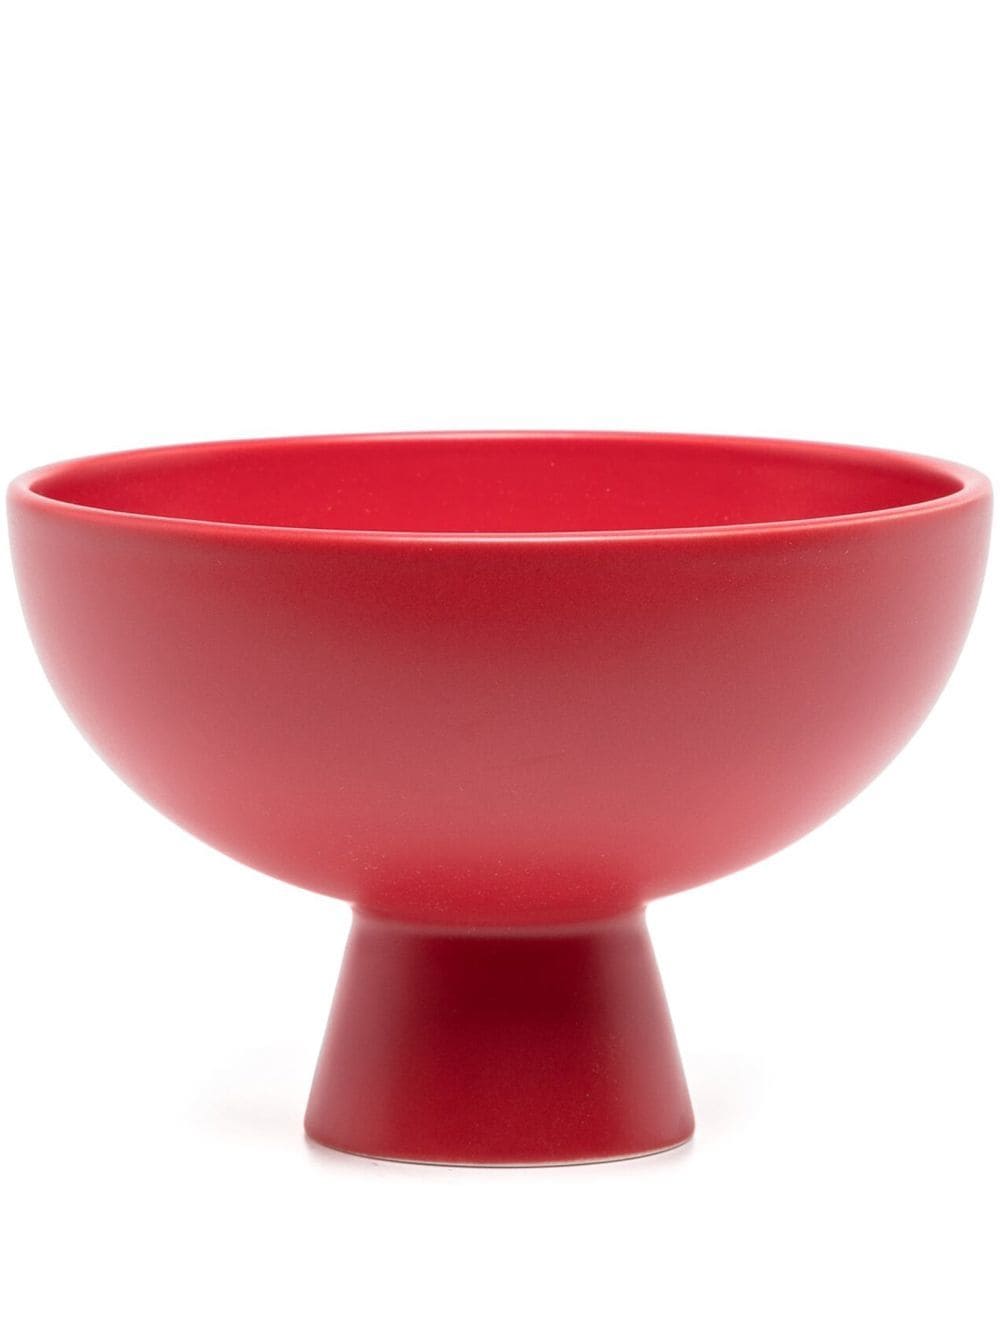 raawii Small Strøm bowl (16cm) - Red